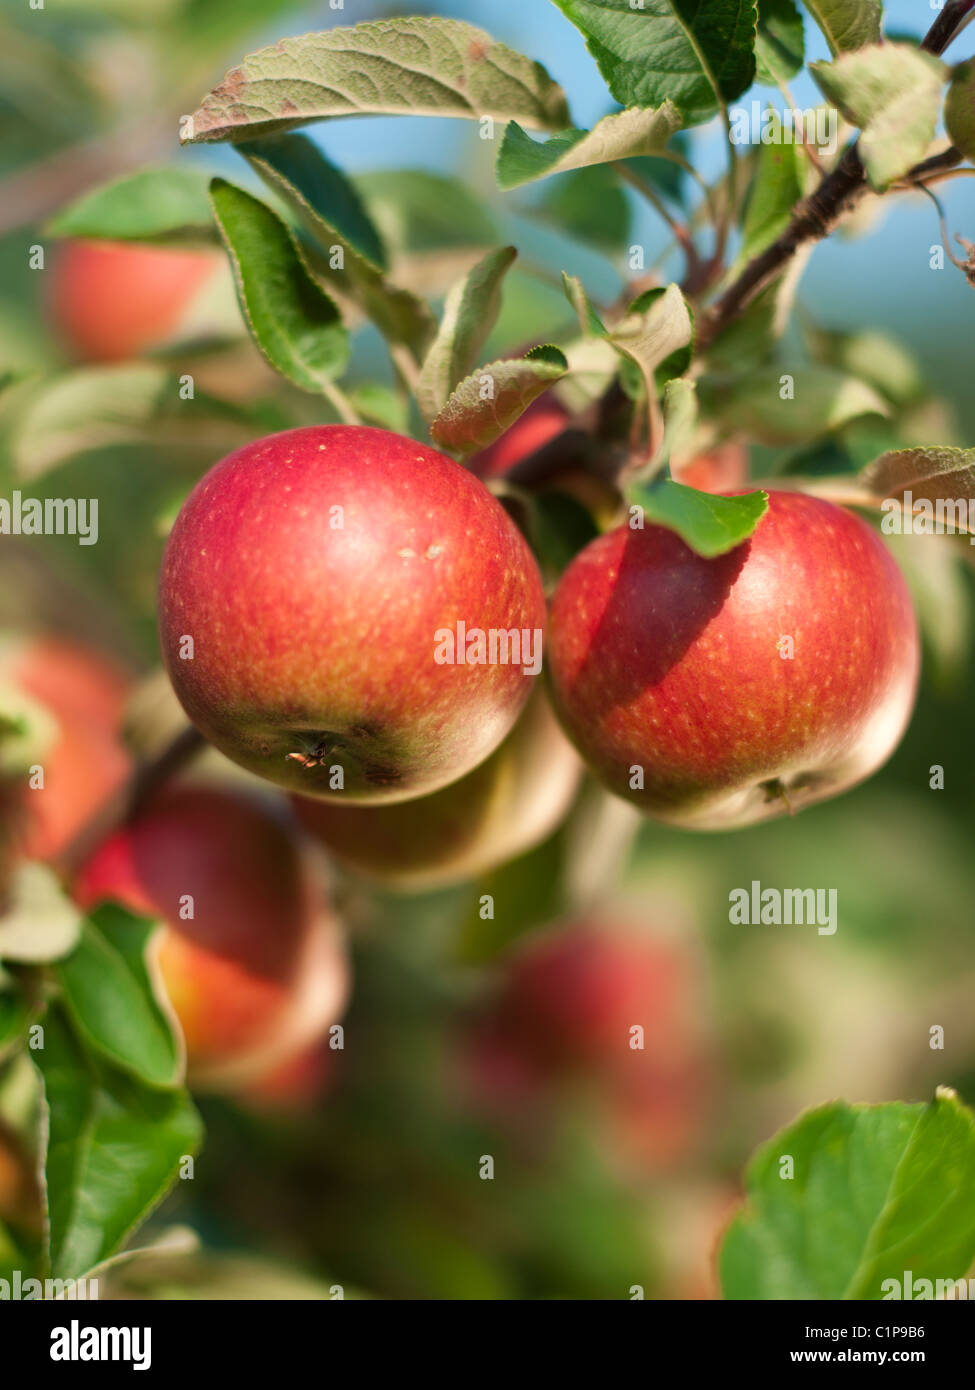 Apples on branch, close-up Stock Photo